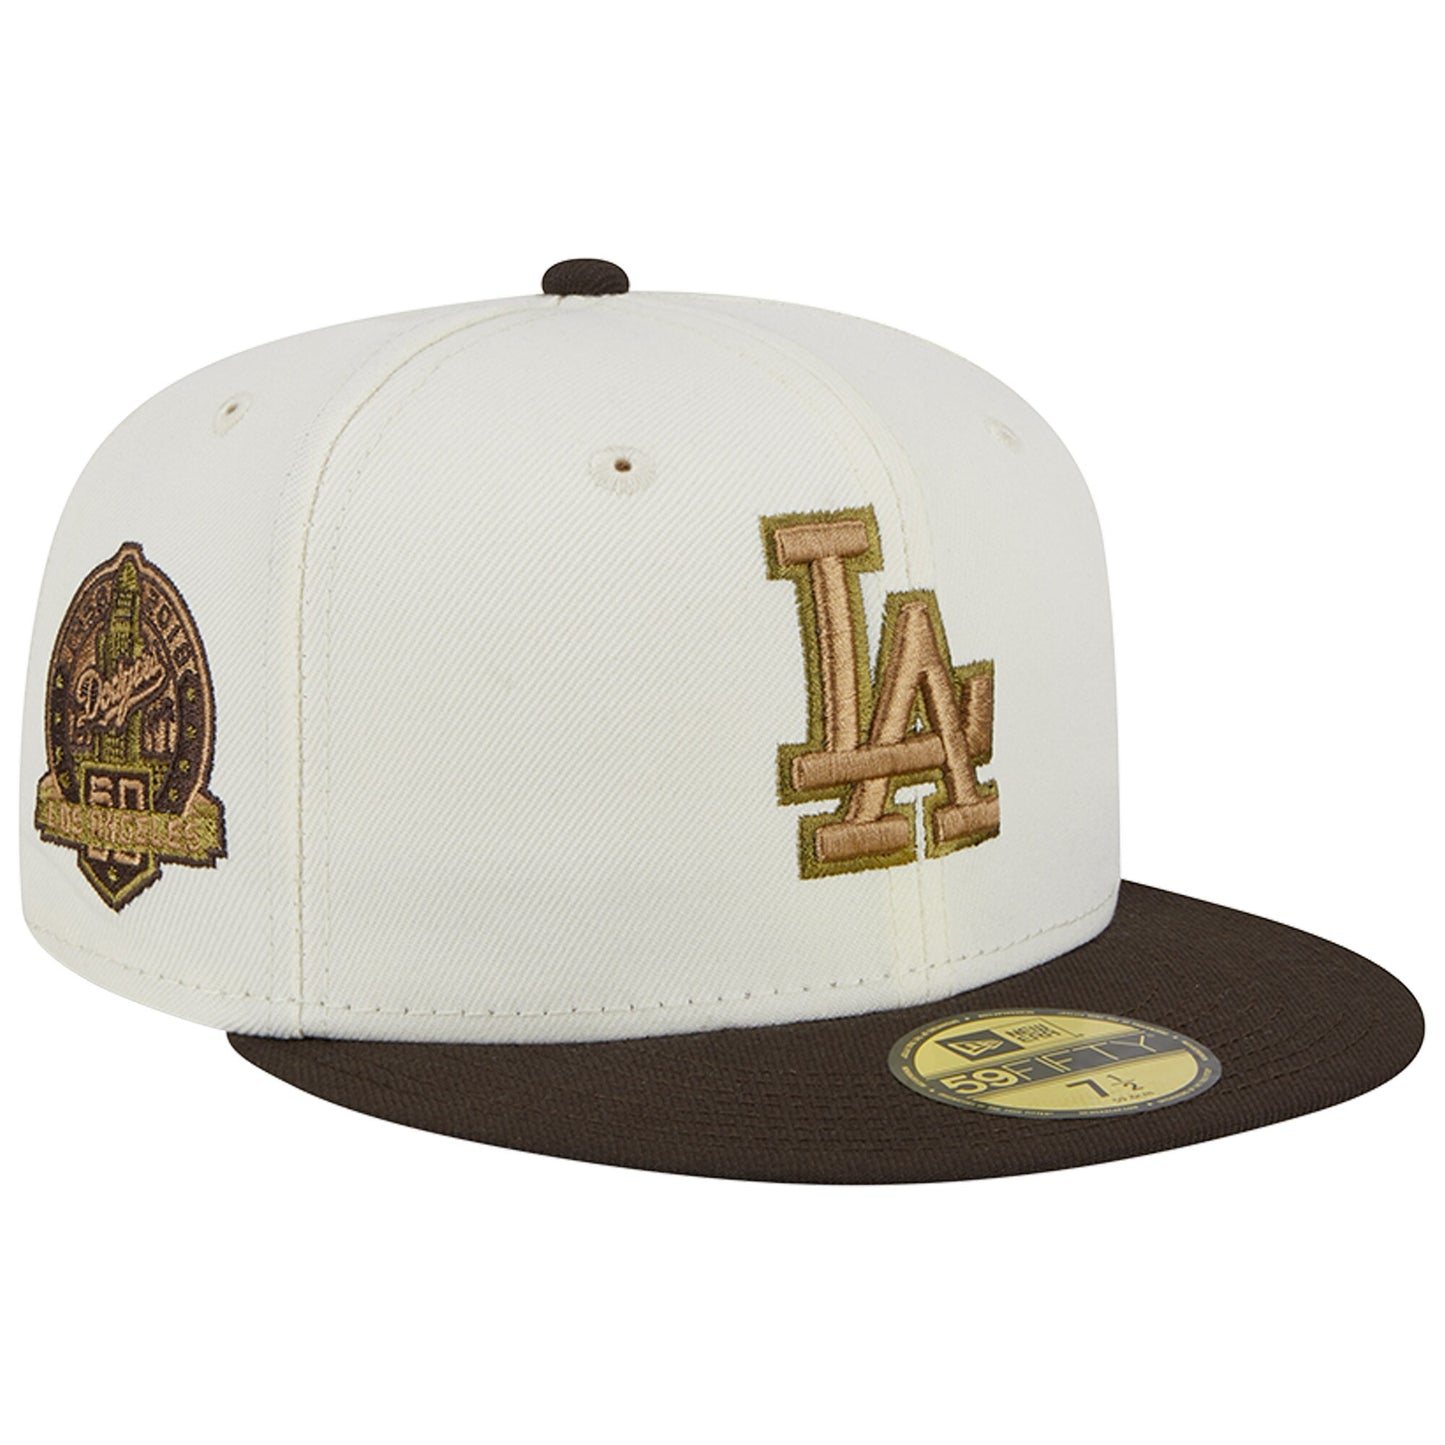 Los Angeles Dodgers New Era 50th Team Anniversary 59FIFTY Fitted Hat - White/Brown